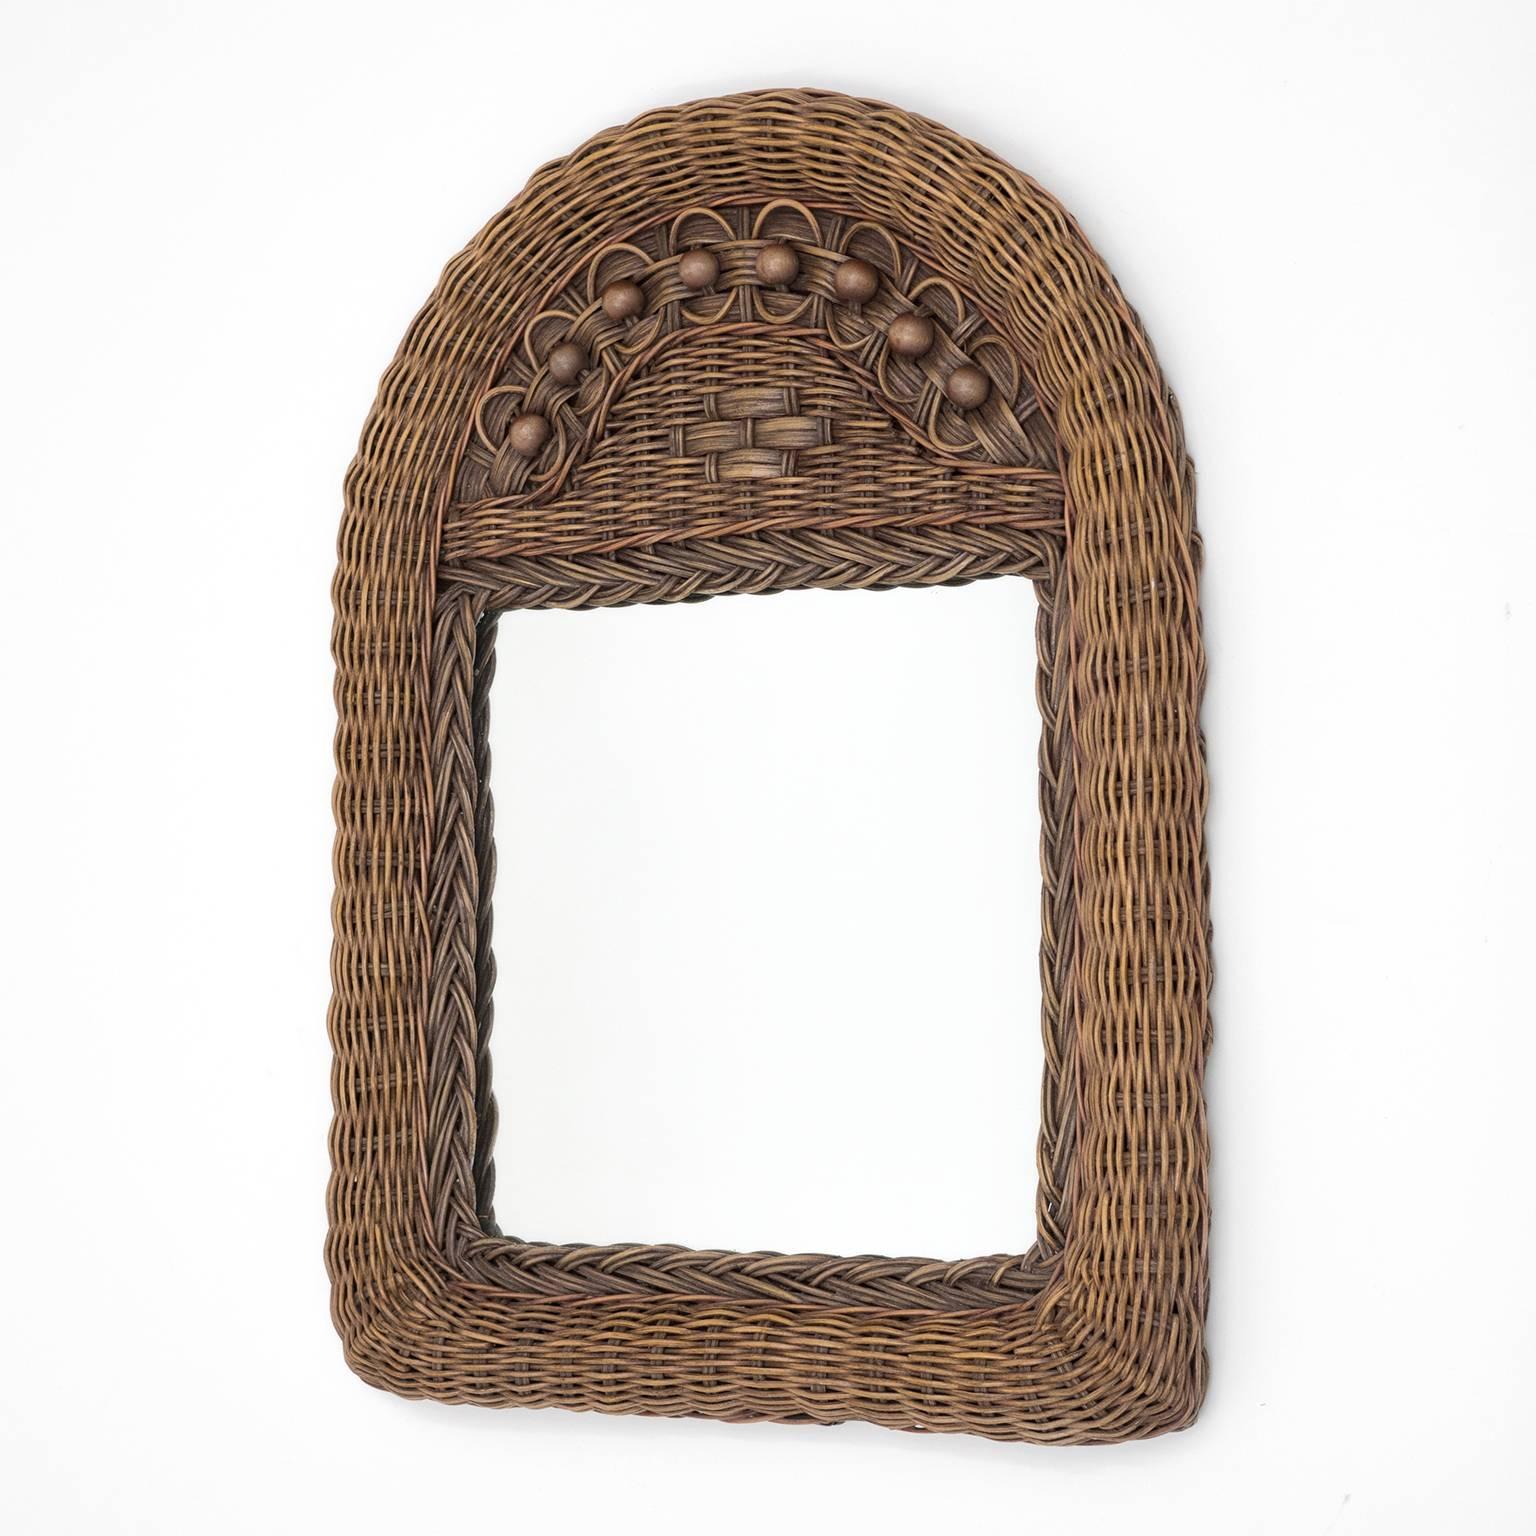 Lovely French artisanal wicker and rattan mirror from the 1960s. Very intricate craftmanship with different hued rattan elements and wood pearl details combined with different weaving patterns. Fine original condition with a touch of